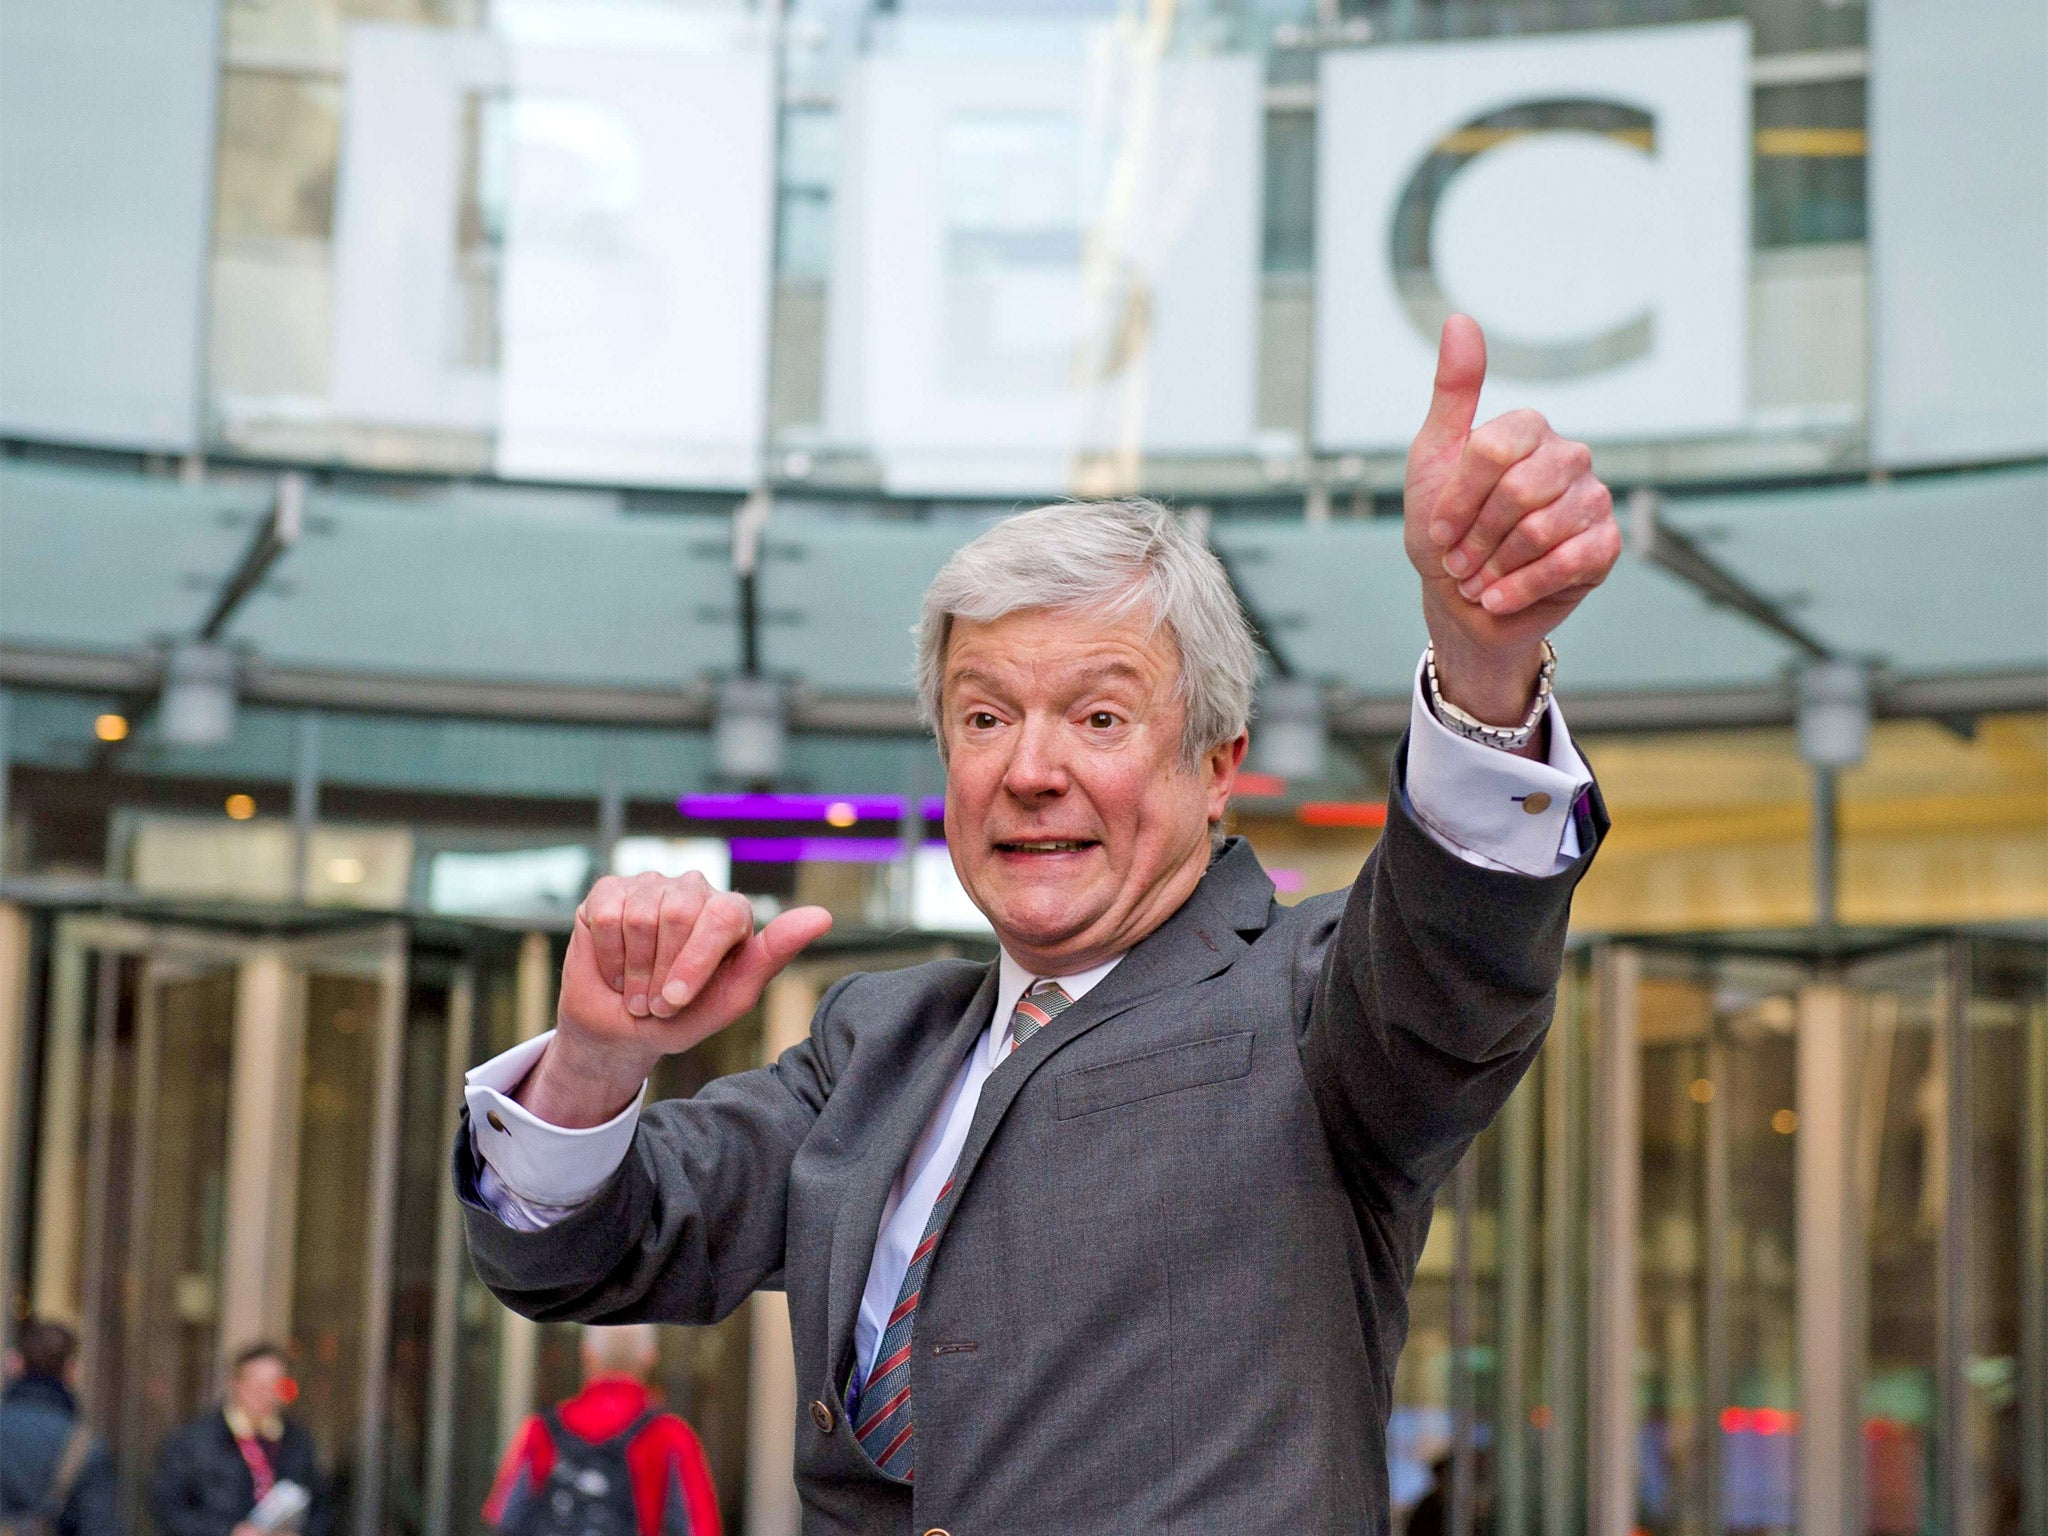 Tony Hall arrives for his first day as Director General of the BBC at New Broadcasting House in central London yesterday